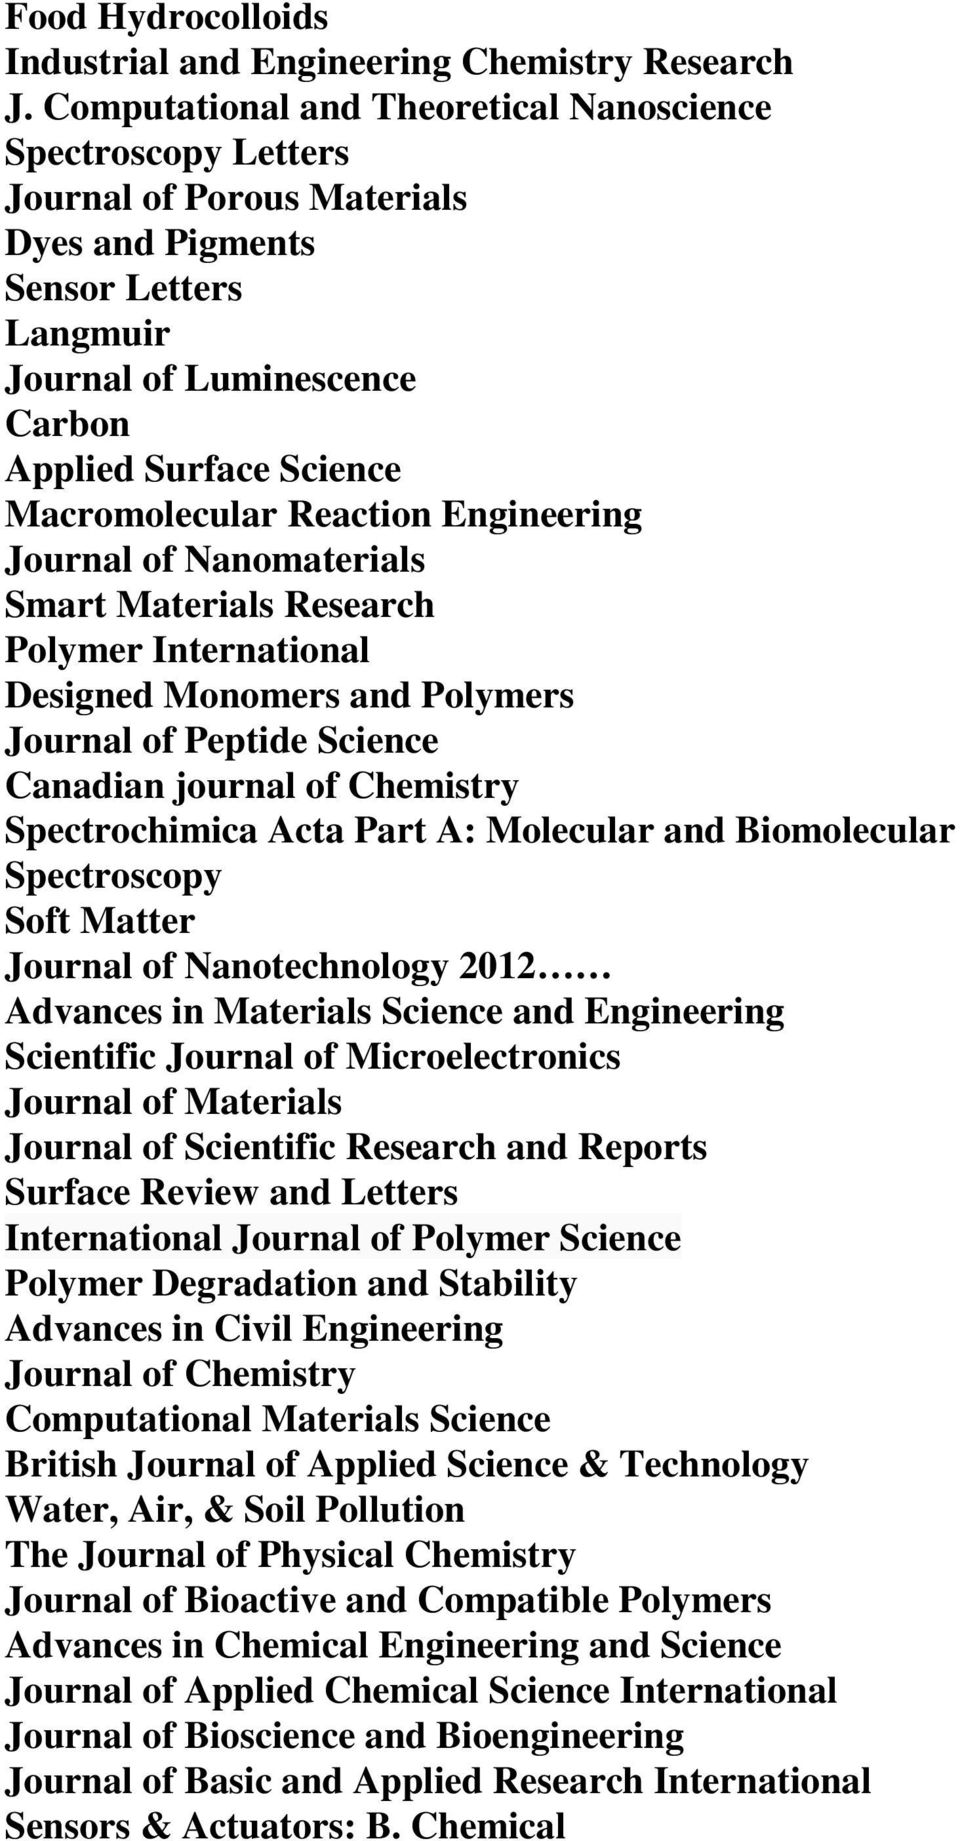 Macromolecular Reaction Engineering Journal of Nanomaterials Smart Materials Research Polymer International Designed Monomers and Polymers Journal of Peptide Science Canadian journal of Chemistry